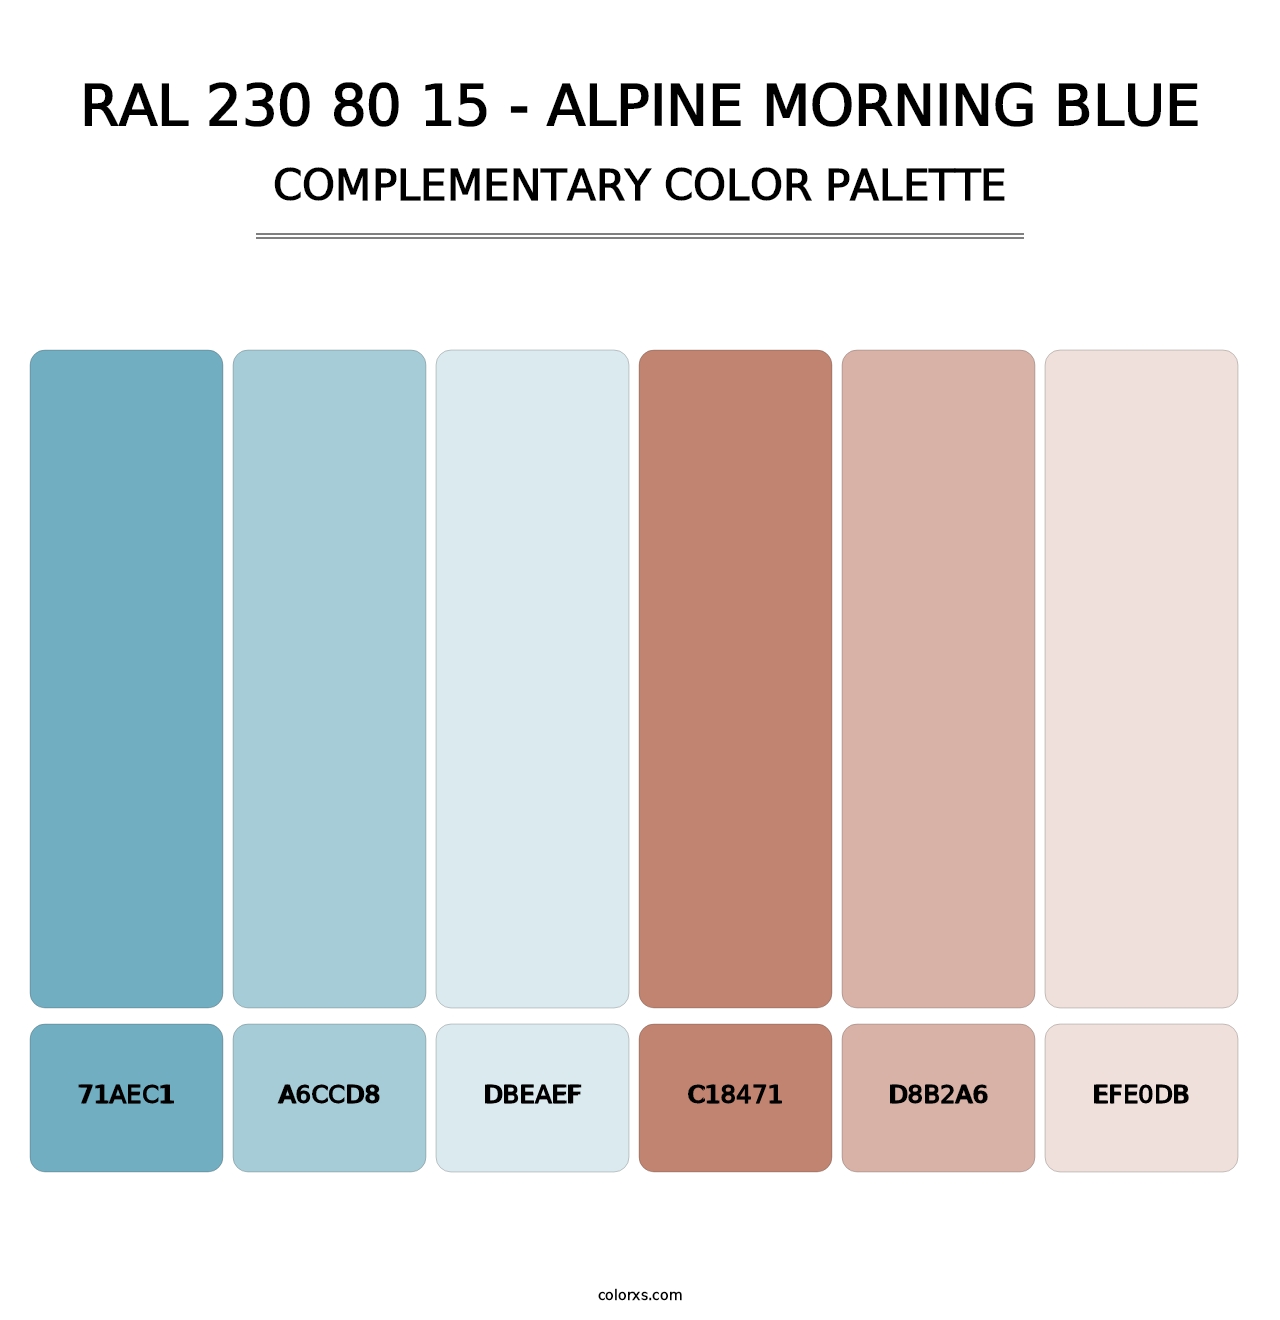 RAL 230 80 15 - Alpine Morning Blue - Complementary Color Palette